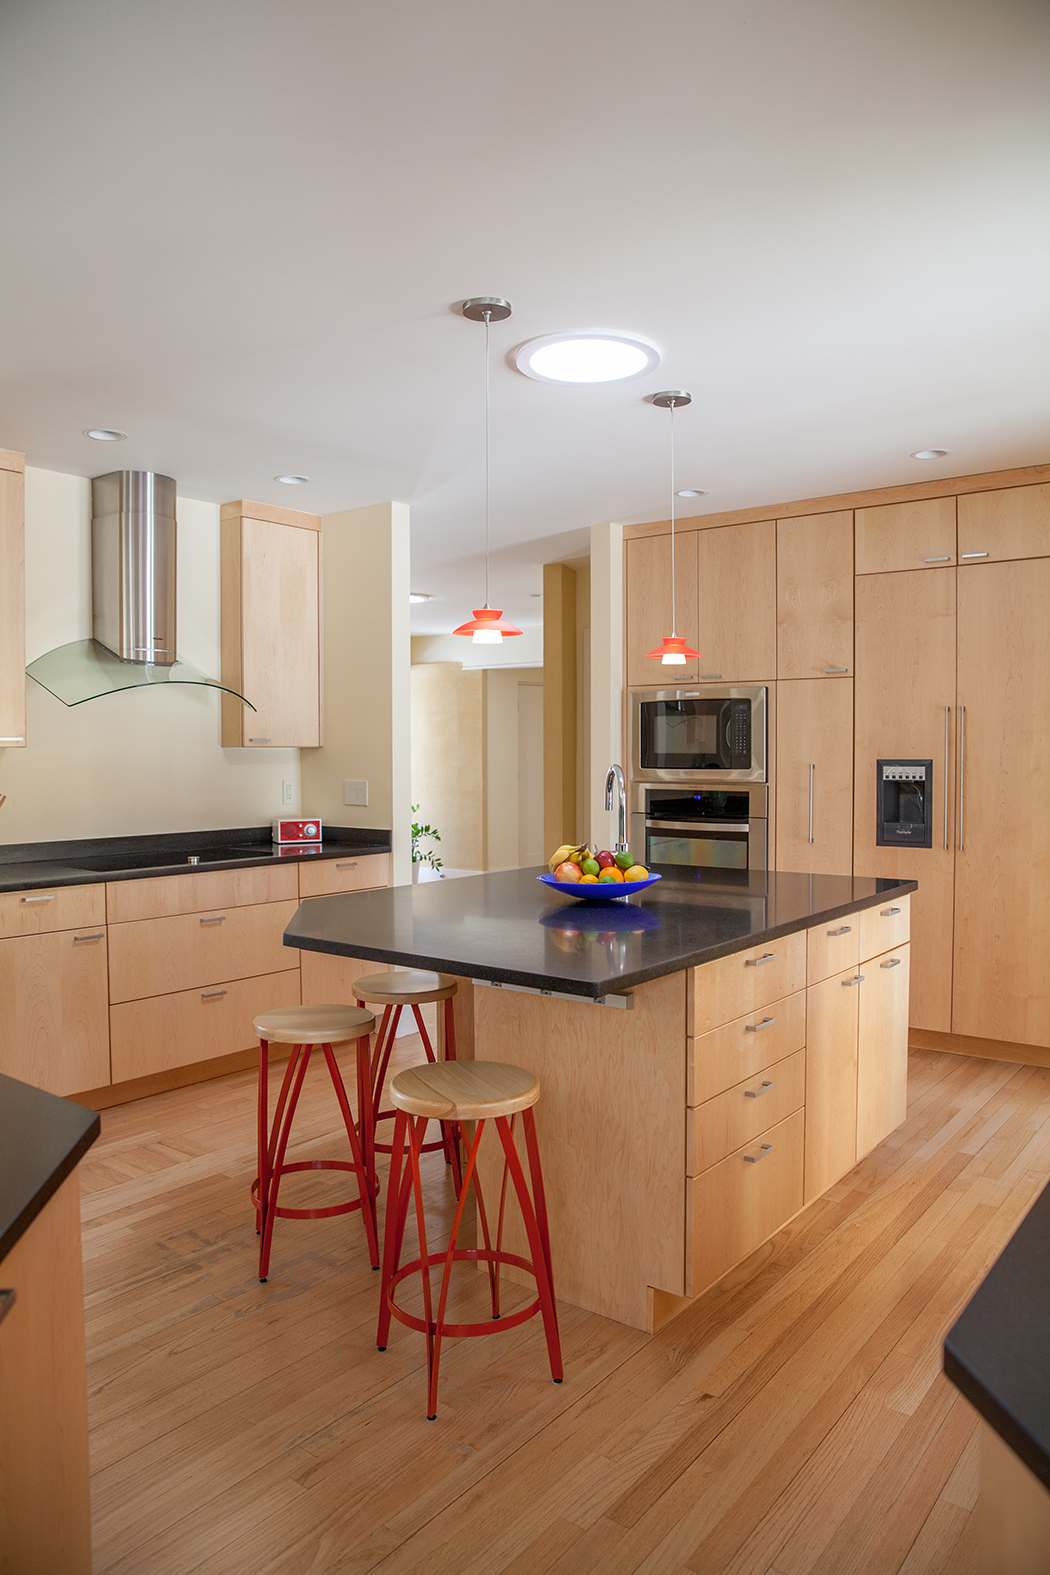 C-VILLE Weekly | In the middle: A centralized kitchen undergoes an overhaul